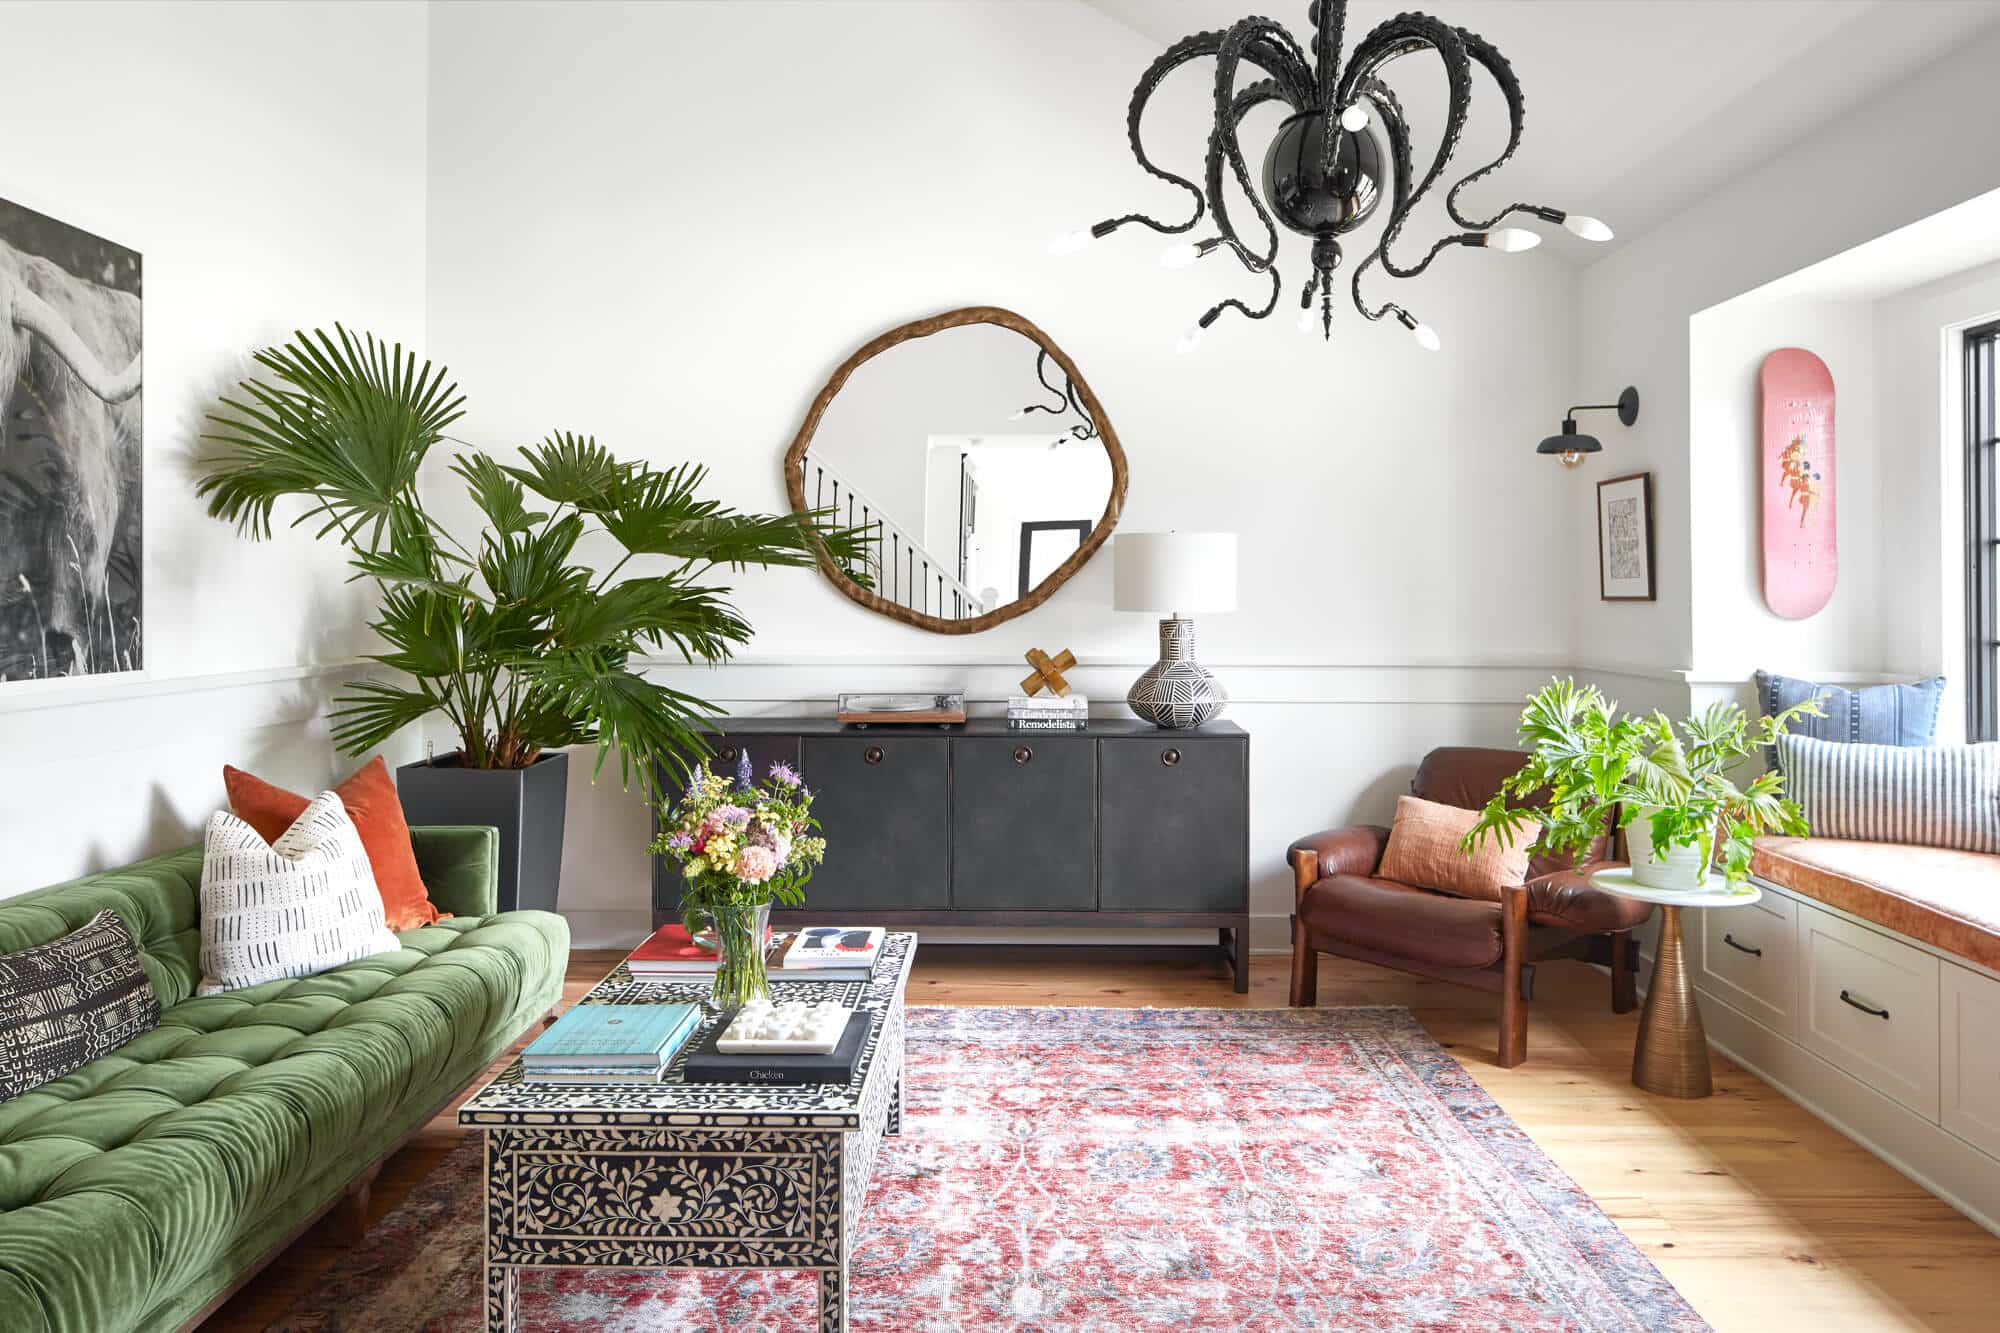 Family Room Interior Designer Eclectic by Michelle Gage Interiors